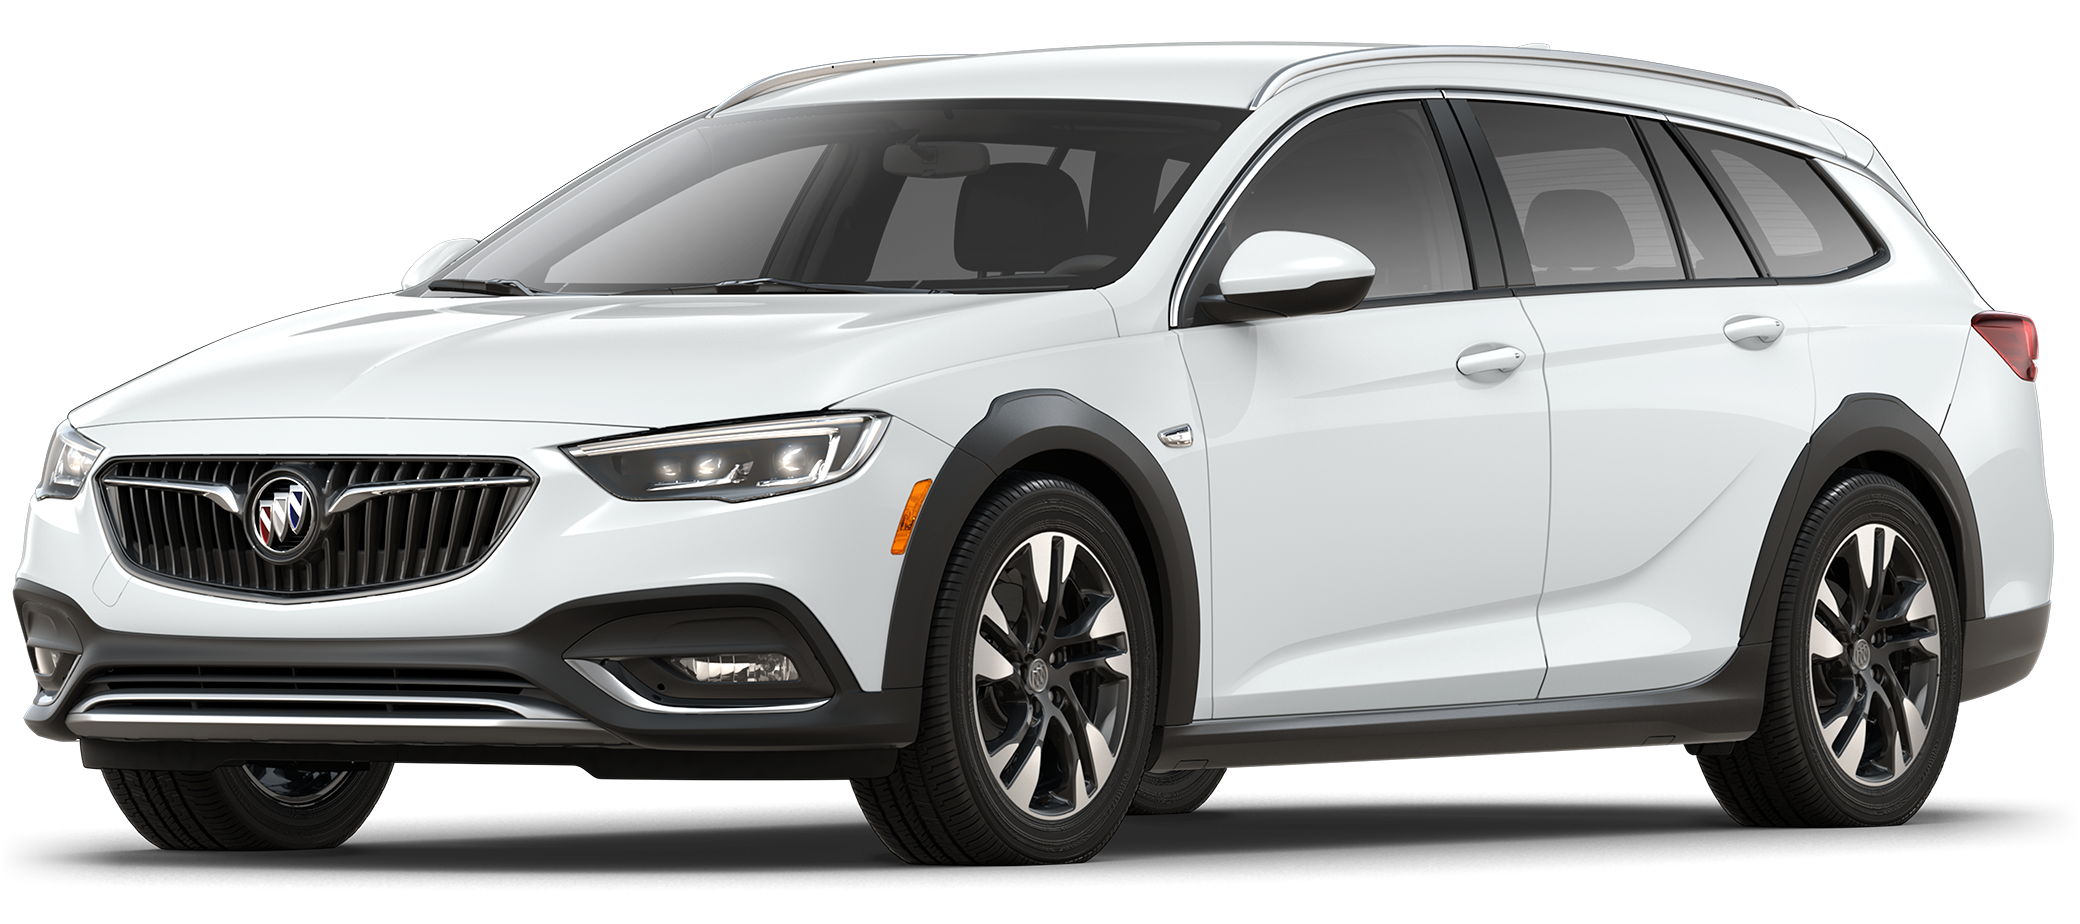 2020 Buick Regal TourX Incentives, Specials & Offers in Cortland NY